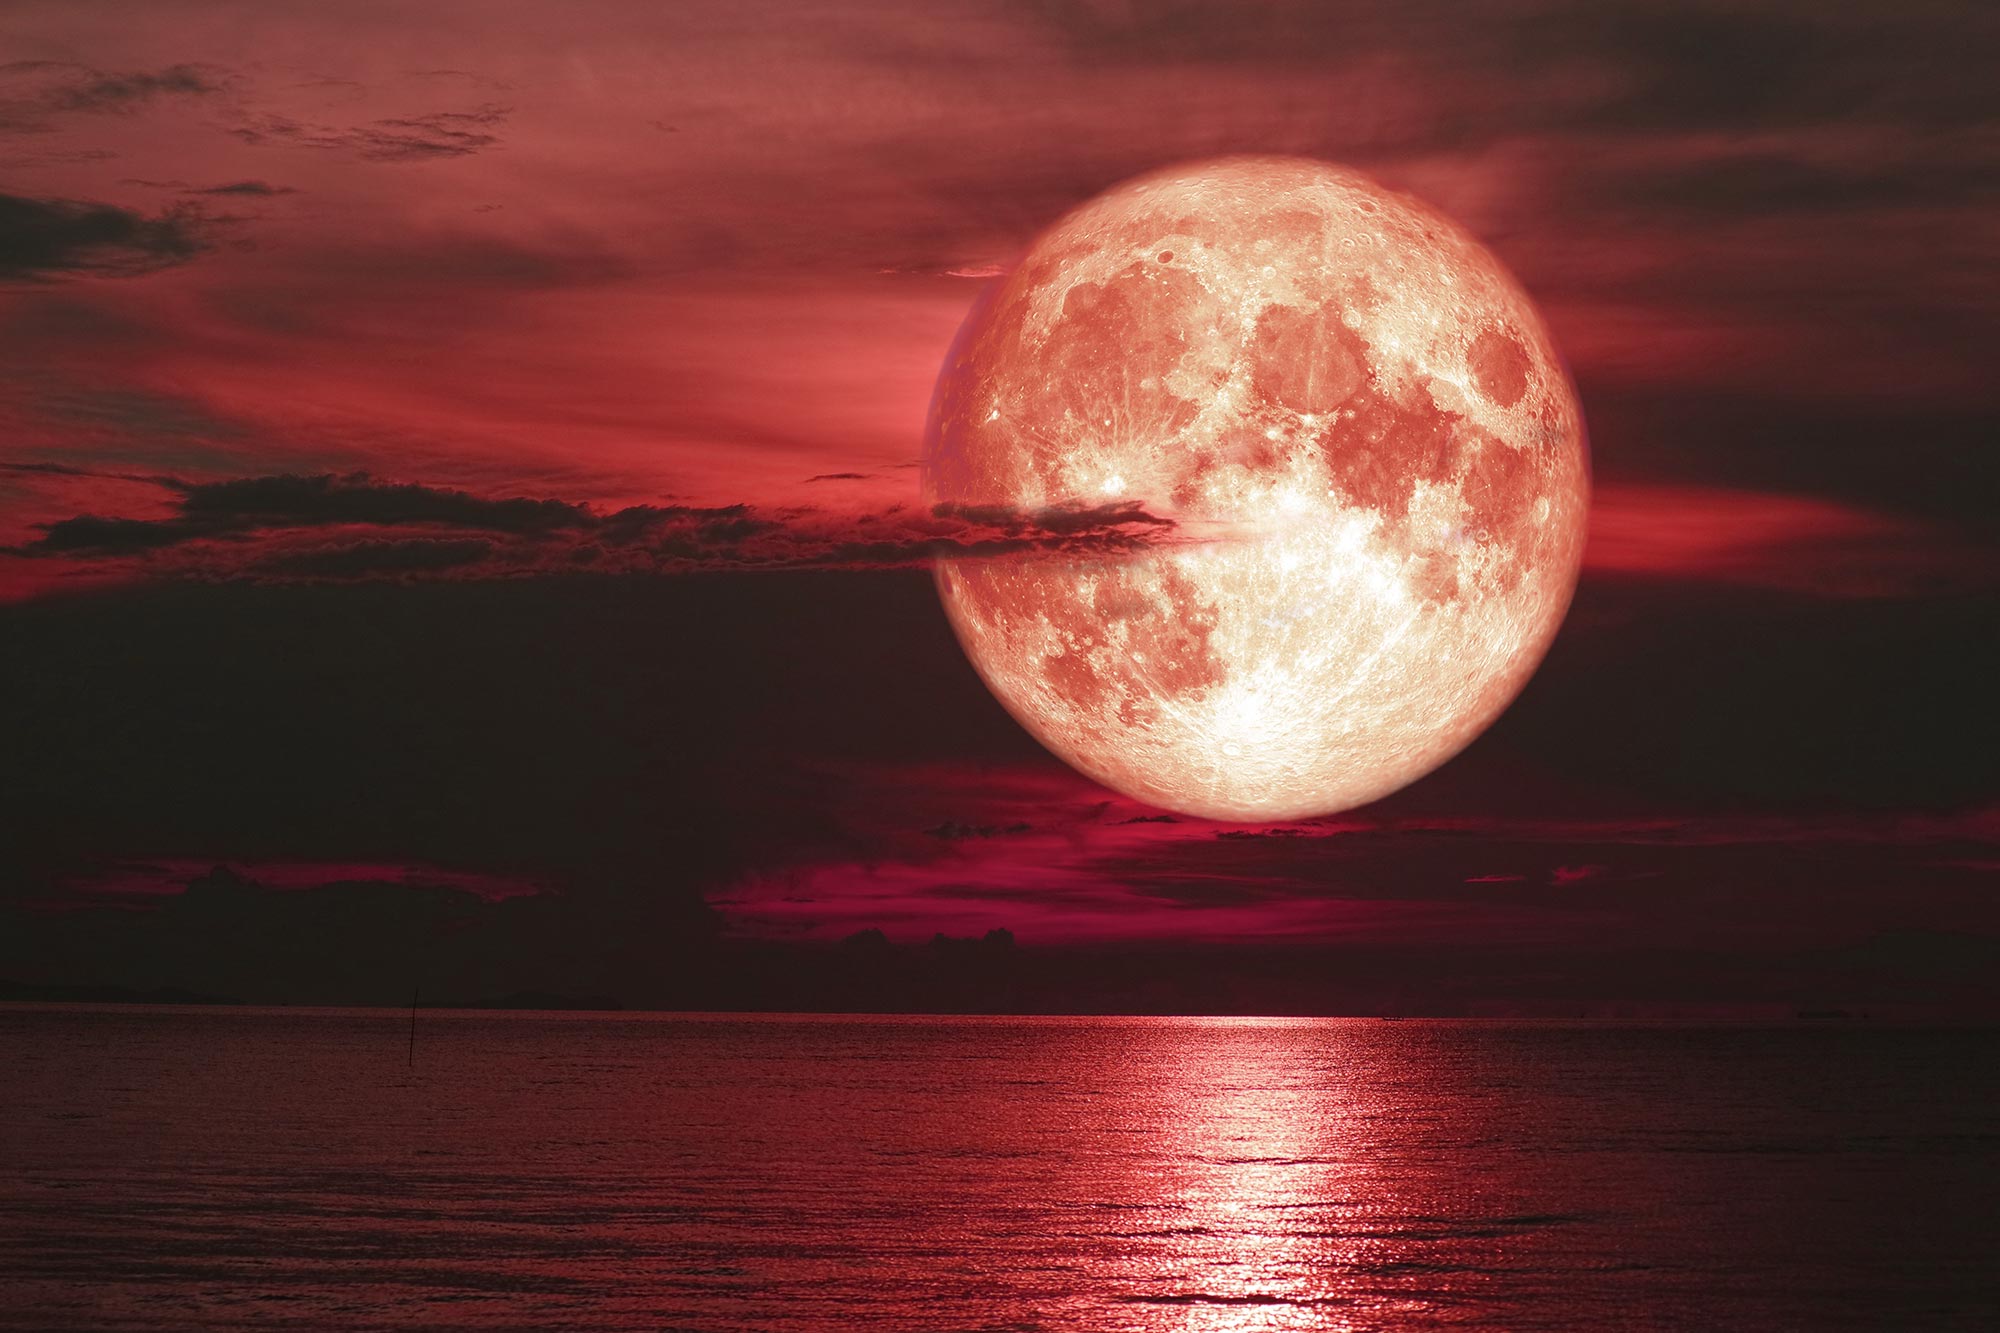 strawberry moon over the ocean